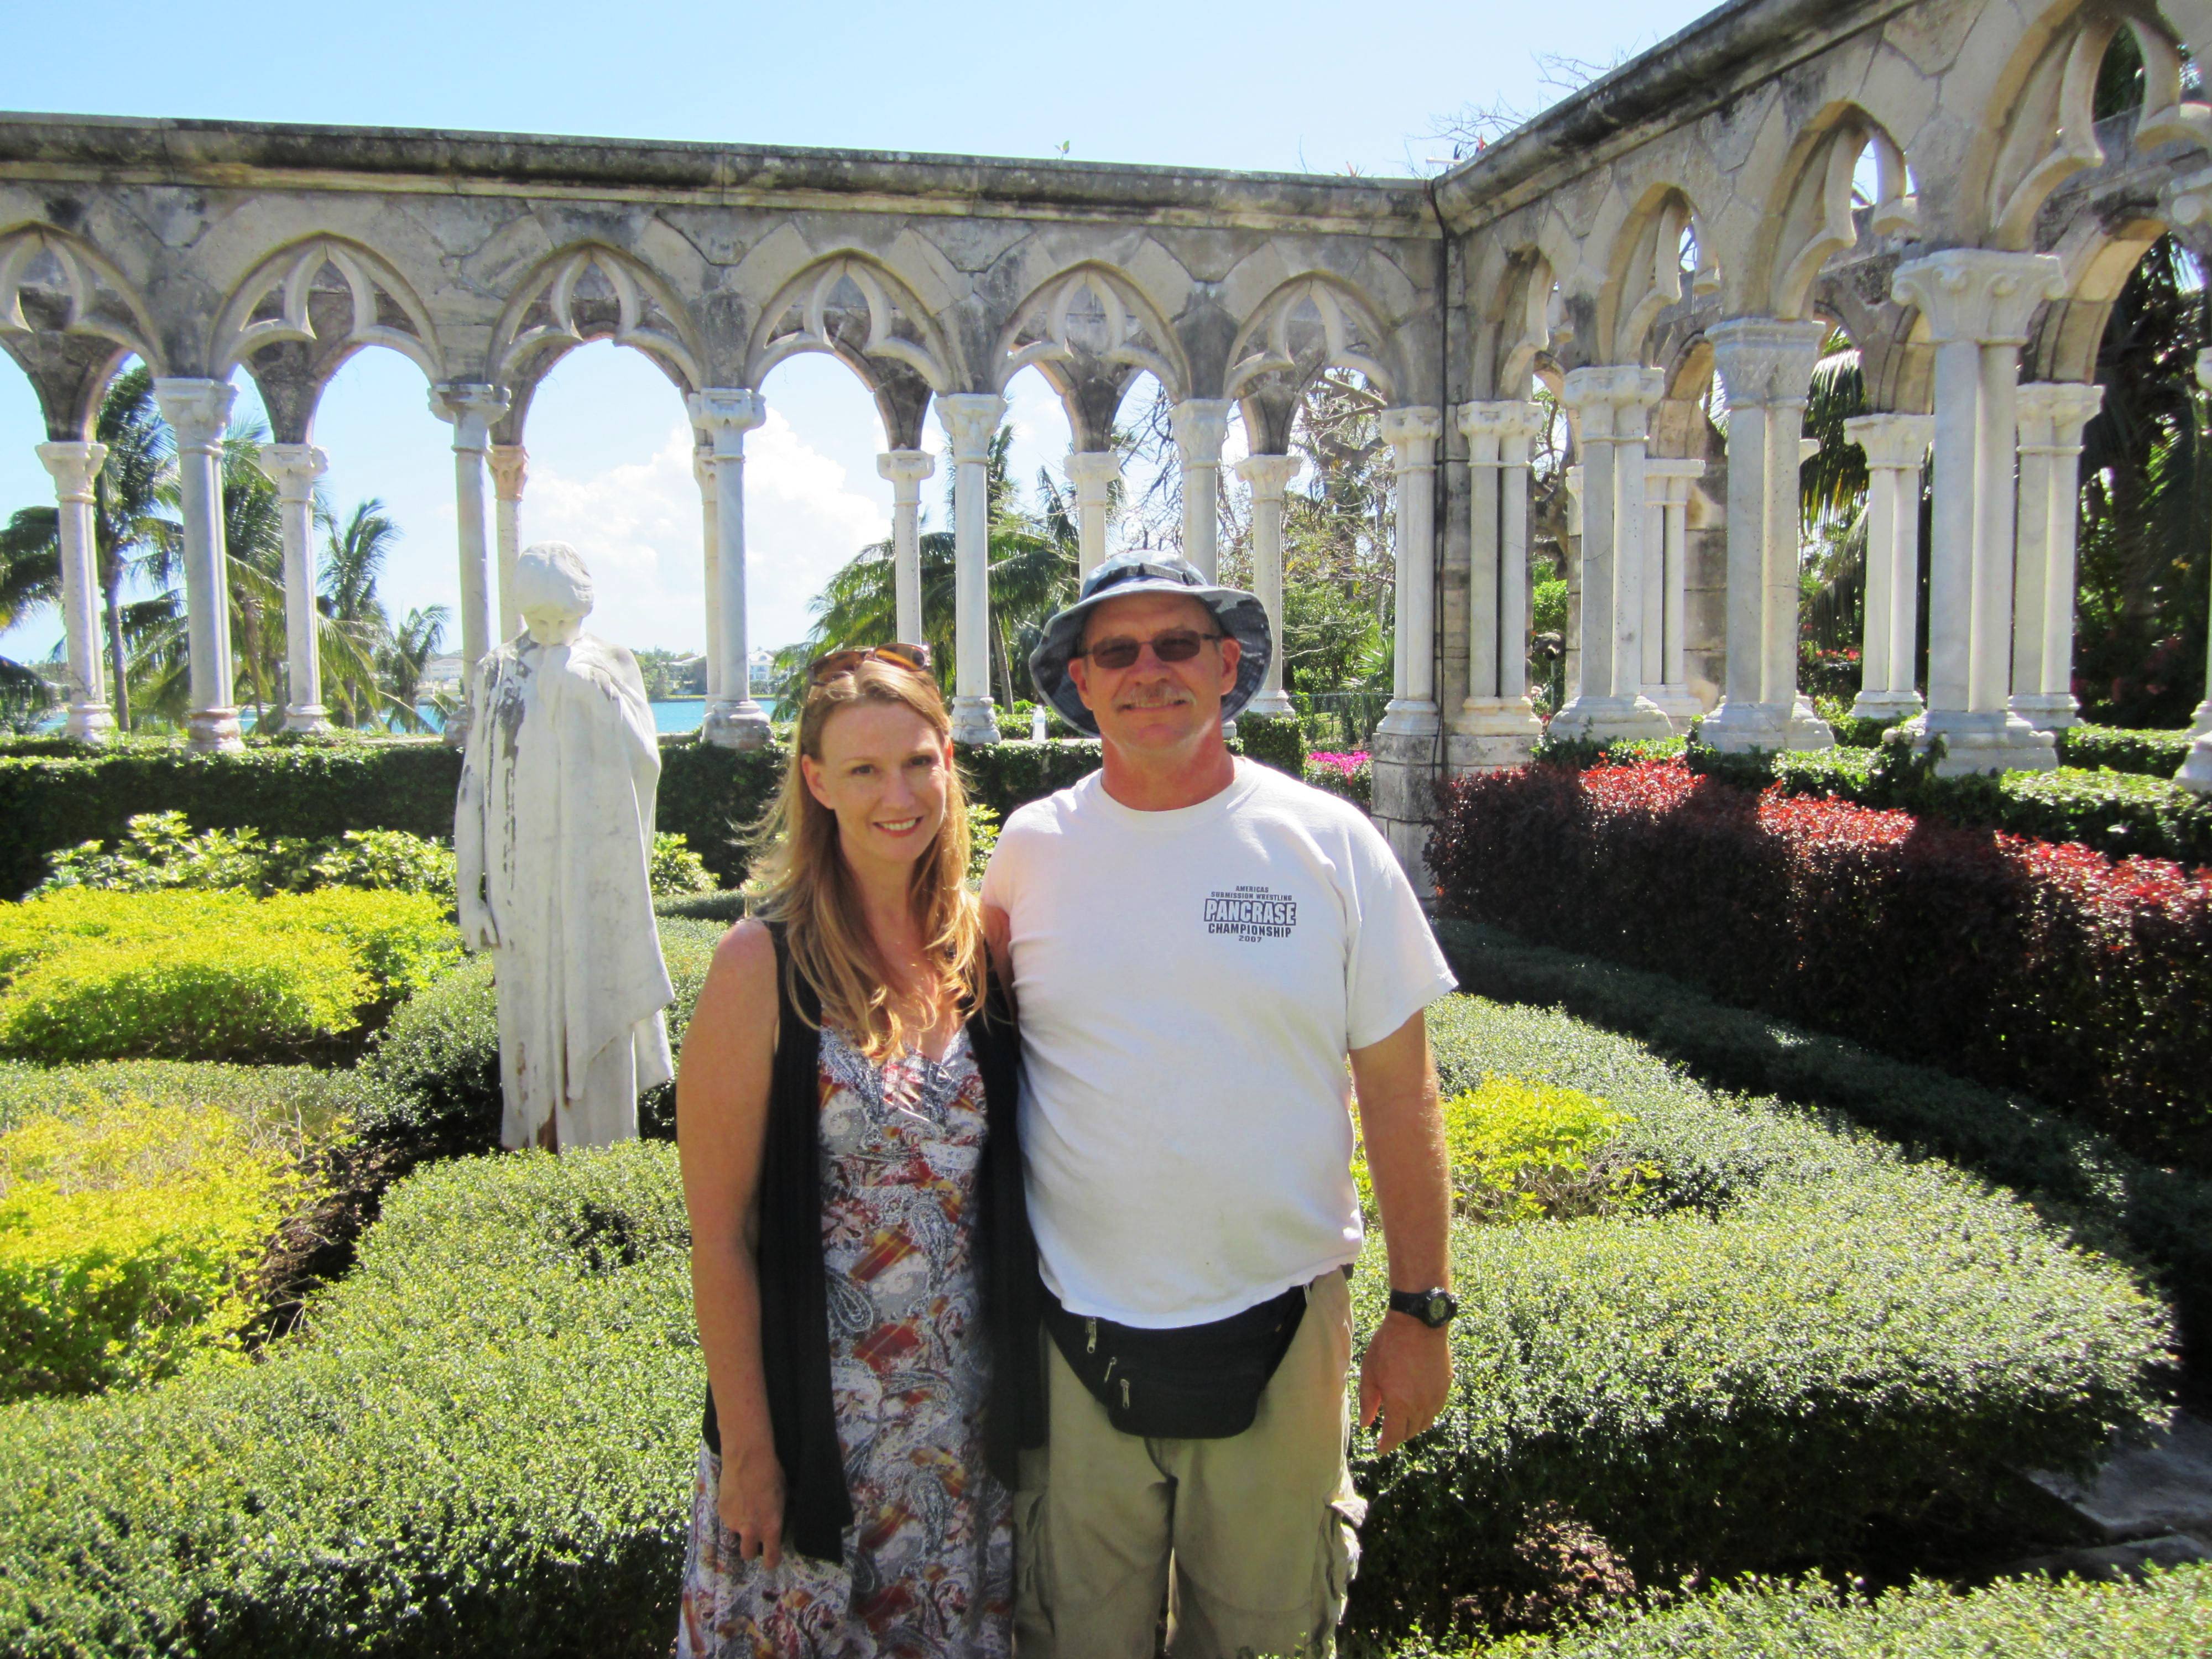 Willy and Deanna at the Cloisters